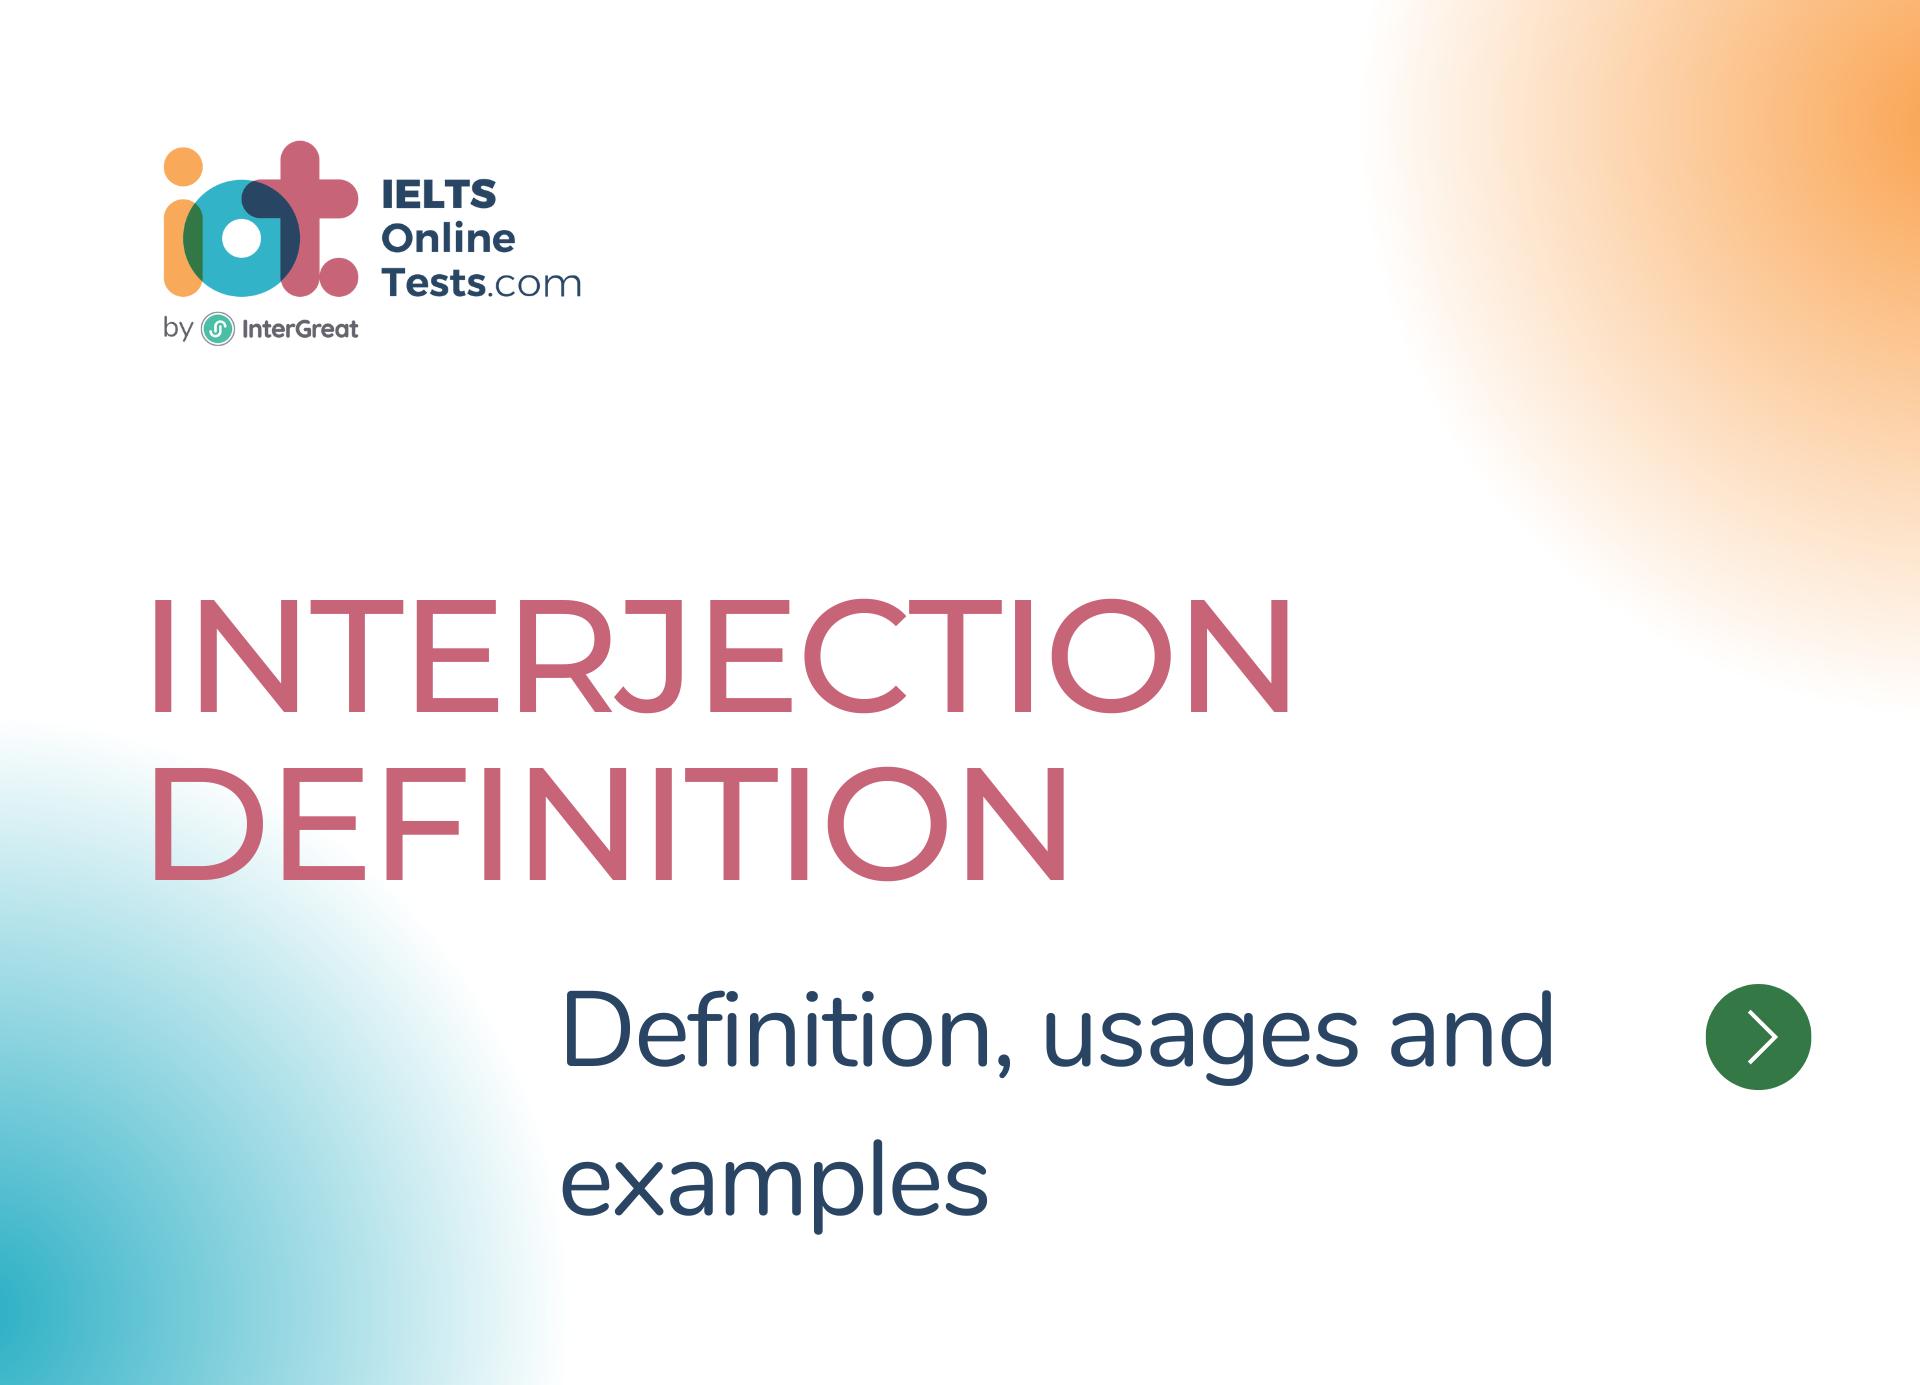 Interjection definition, usages and examples